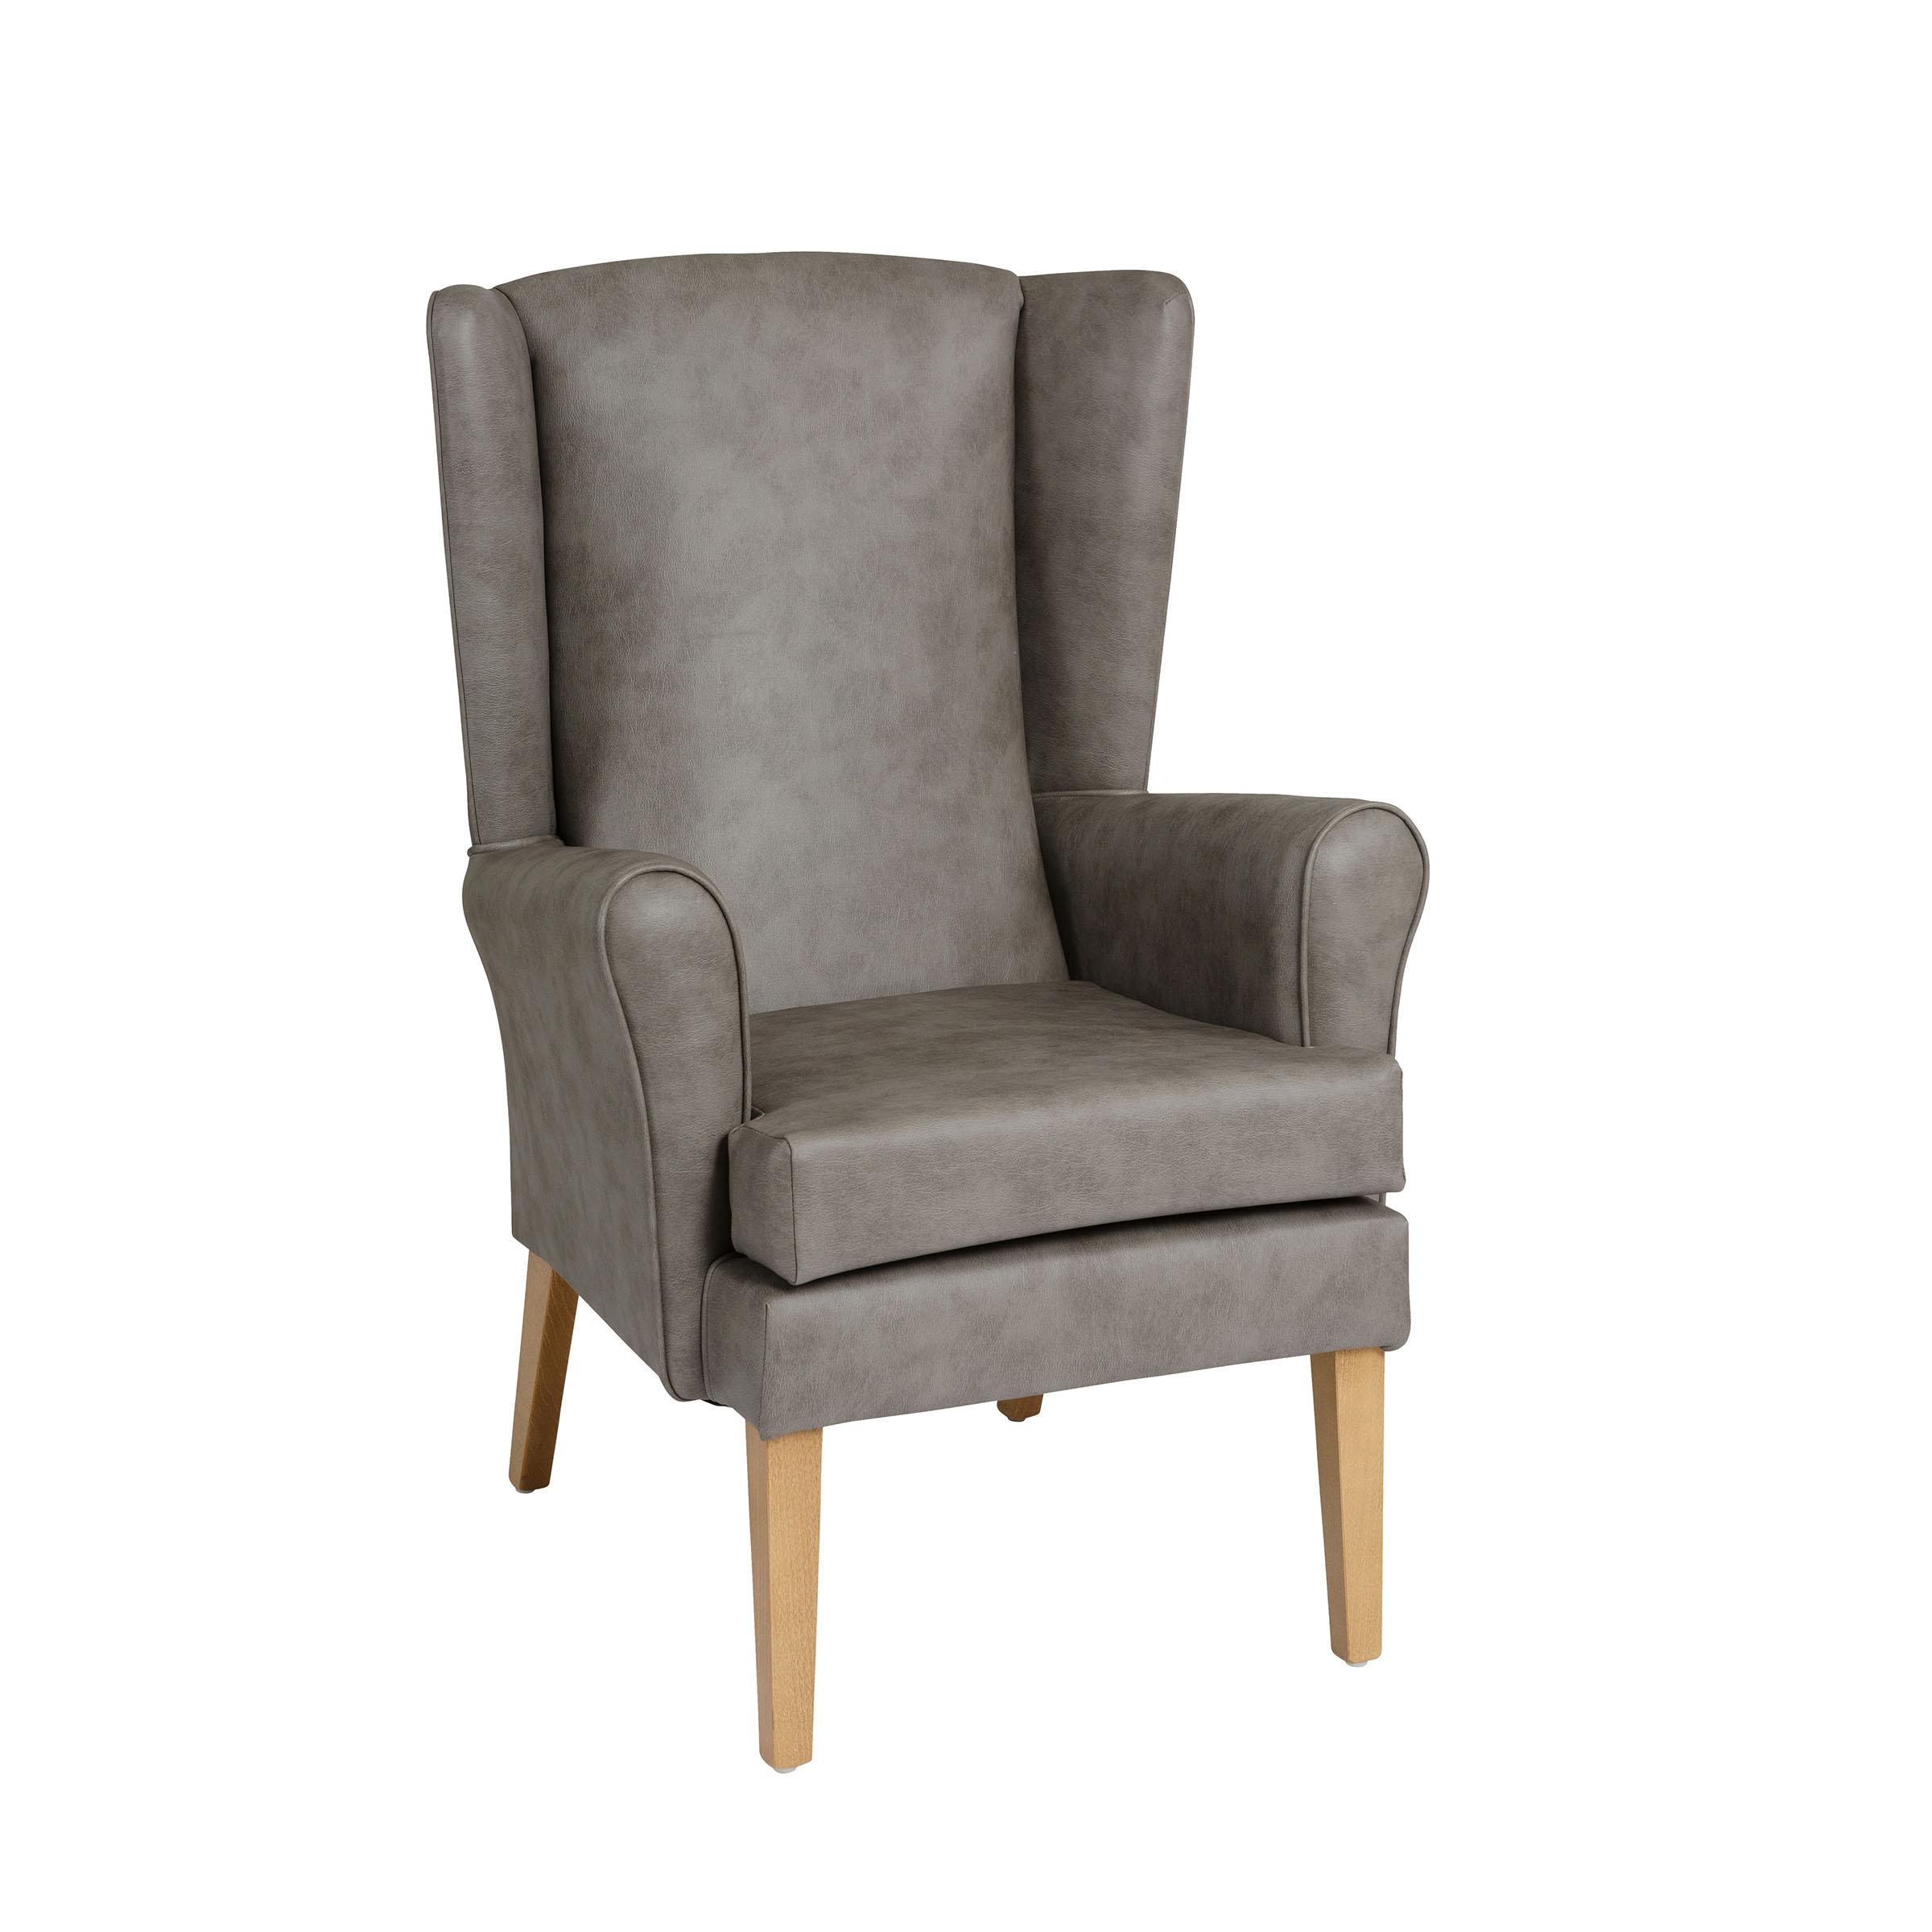 Ravenna High Back Chair with Wings - Ryde Flint